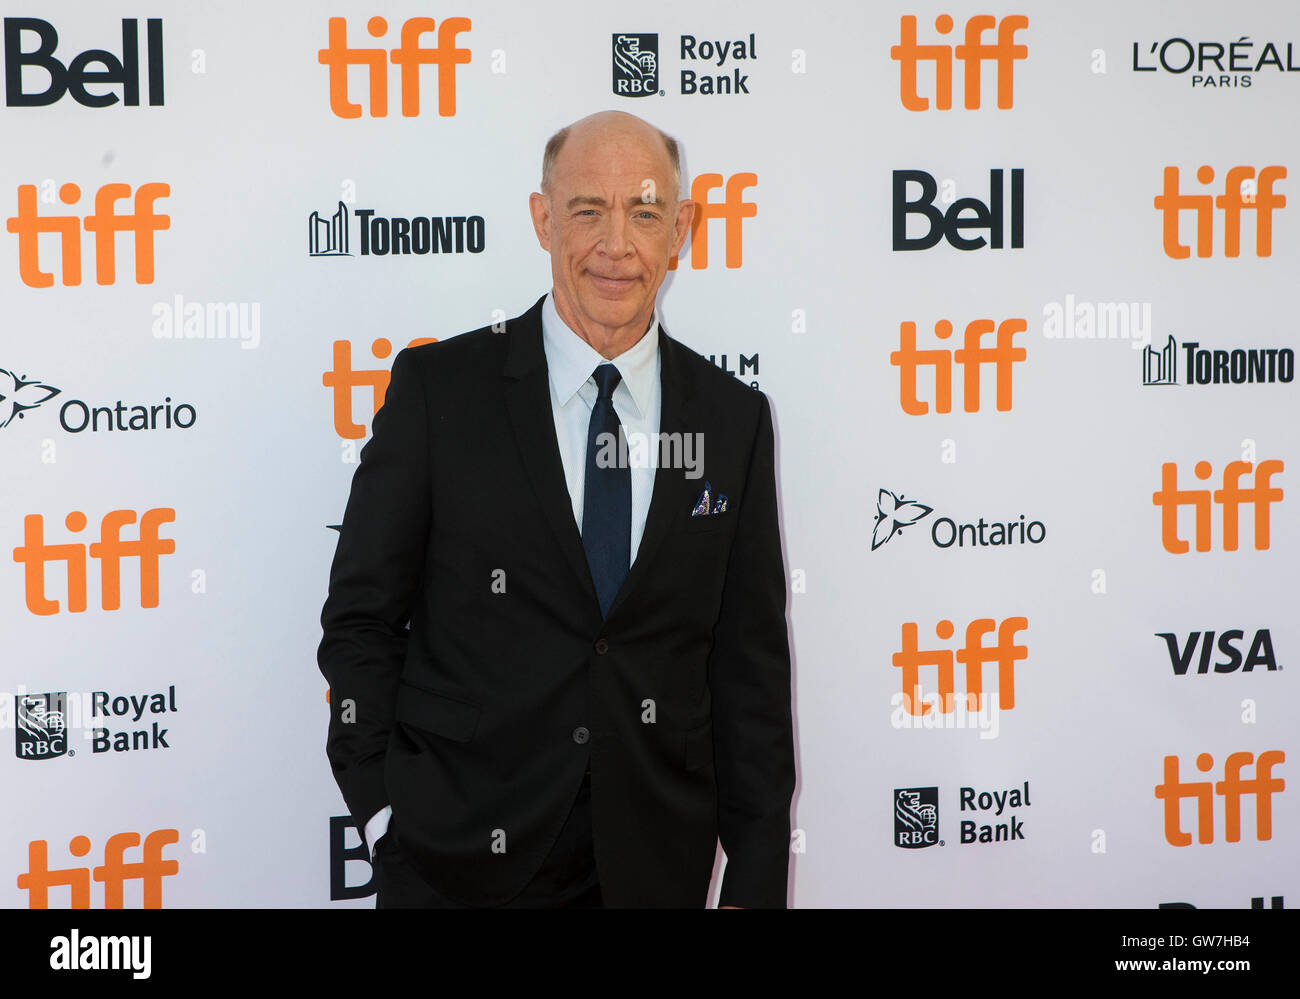 Toronto, Canada. 12th Sep, 2016. Actor J. K. Simmons poses for photos before the Canadian premiere of the film 'La La Land' at the Princess of Wales Theater during the 41st Toronto International Film Festival in Toronto, Canada, Sept. 12, 2016. Credit:  Zou Zheng/Xinhua/Alamy Live News Stock Photo